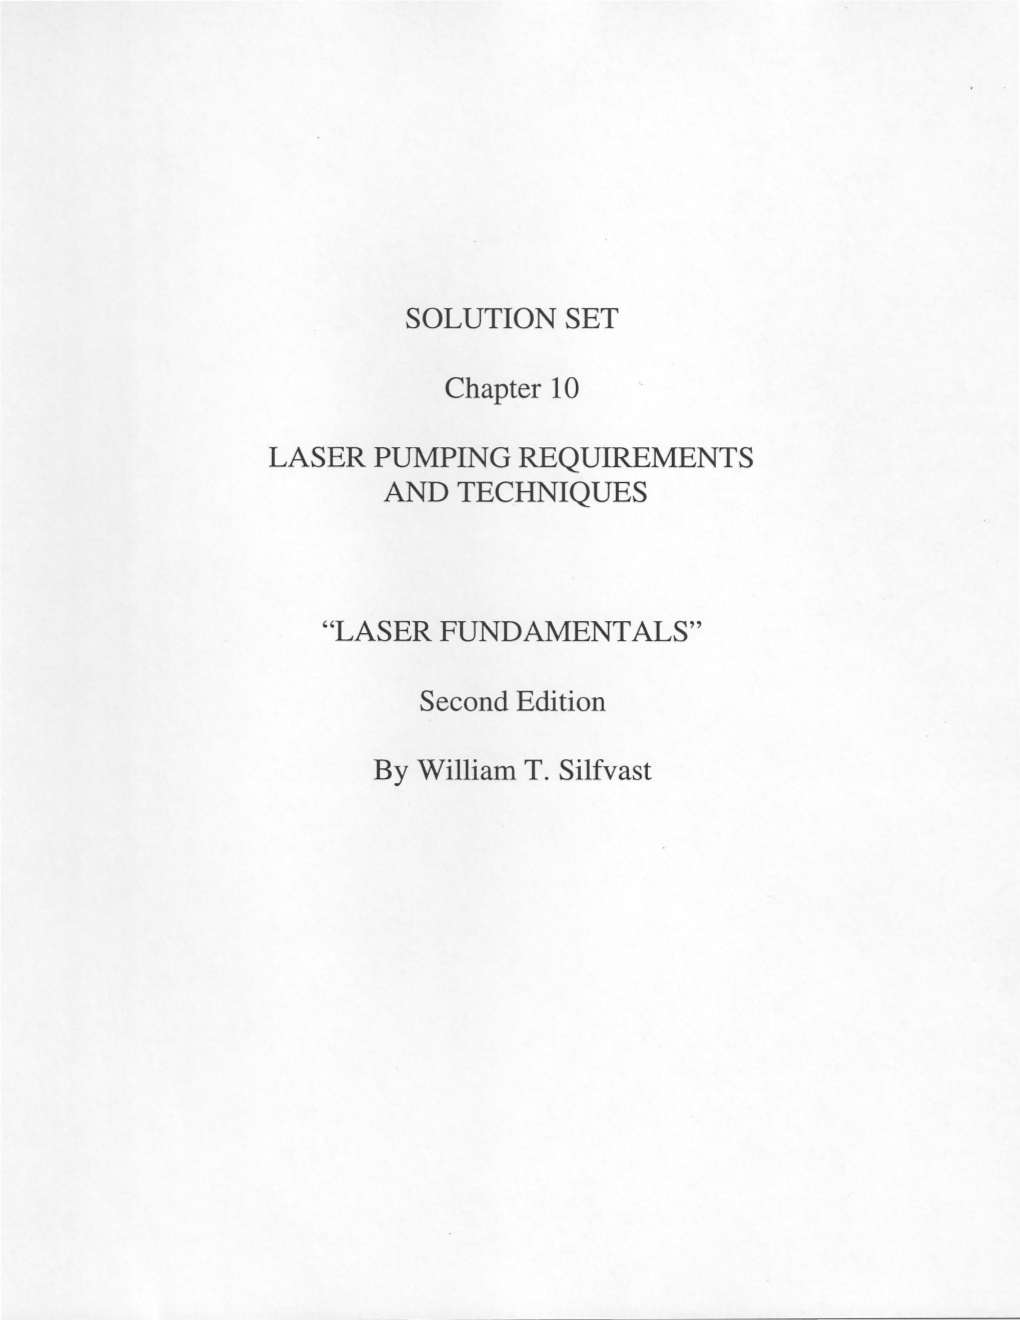 SOLUTION SET Chapter 10 LASER PUMPING REQUIREMENTS AND